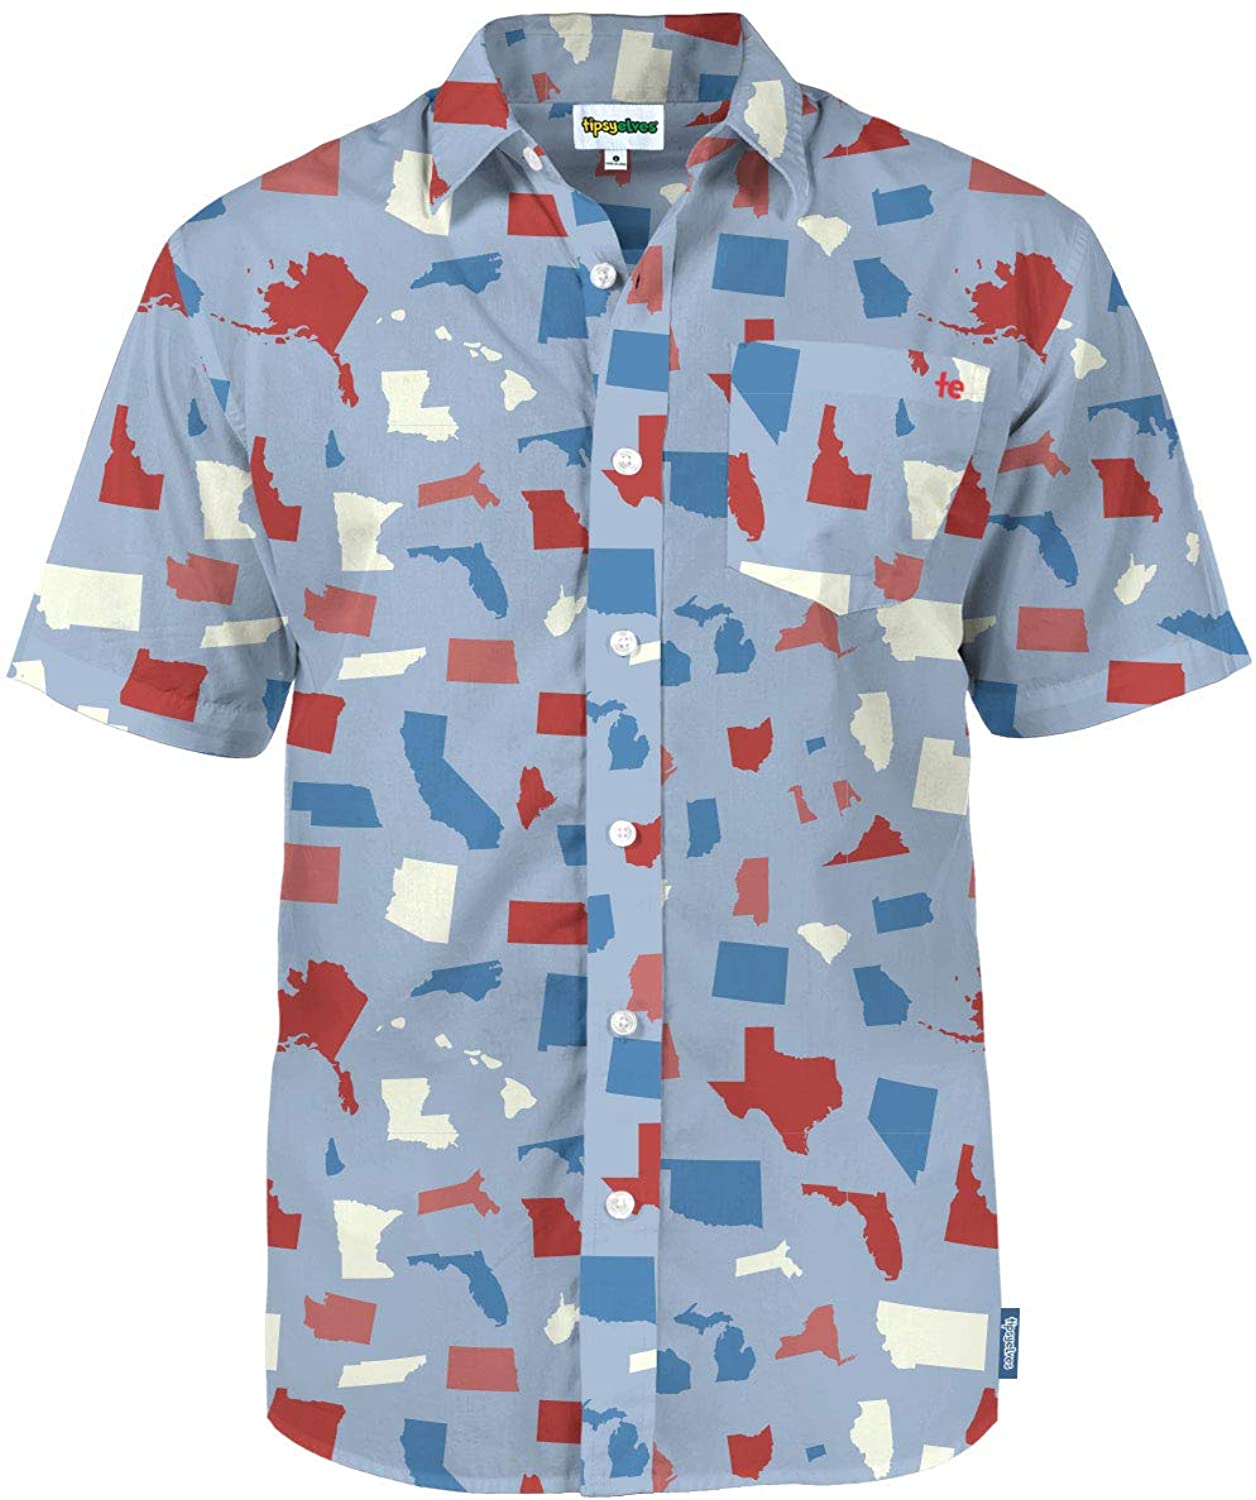 Patriotic Women's Button Down Shirts Tipsy Elves 4th of July Shirts for Women 